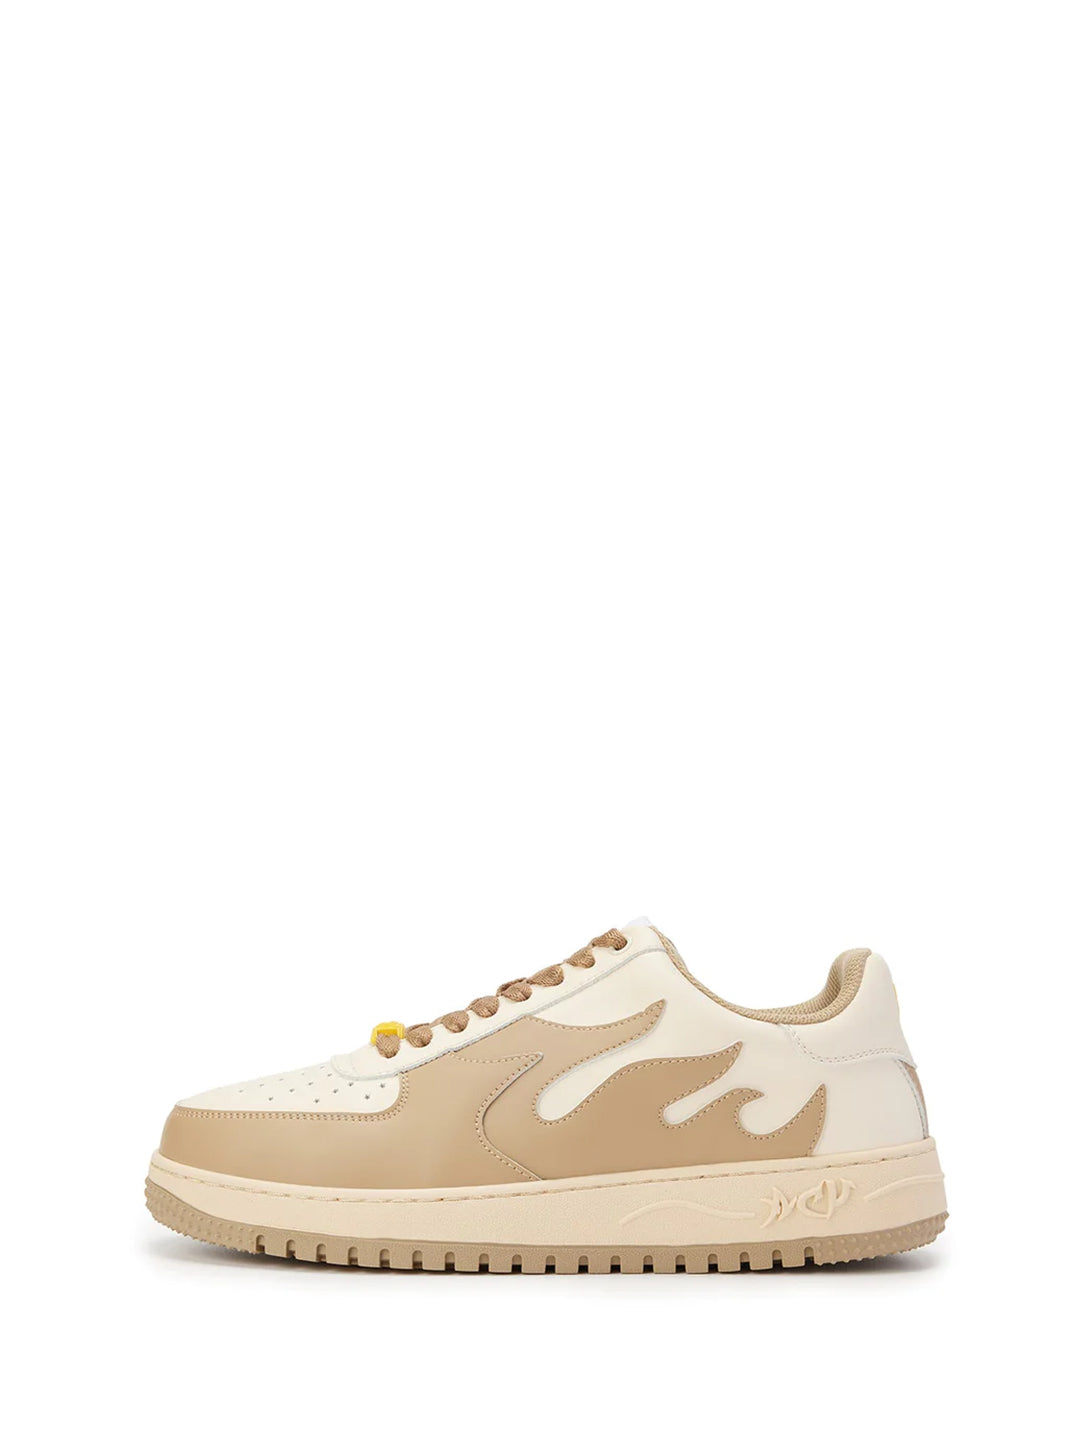 Acupuncture Acu Force beige sneakers